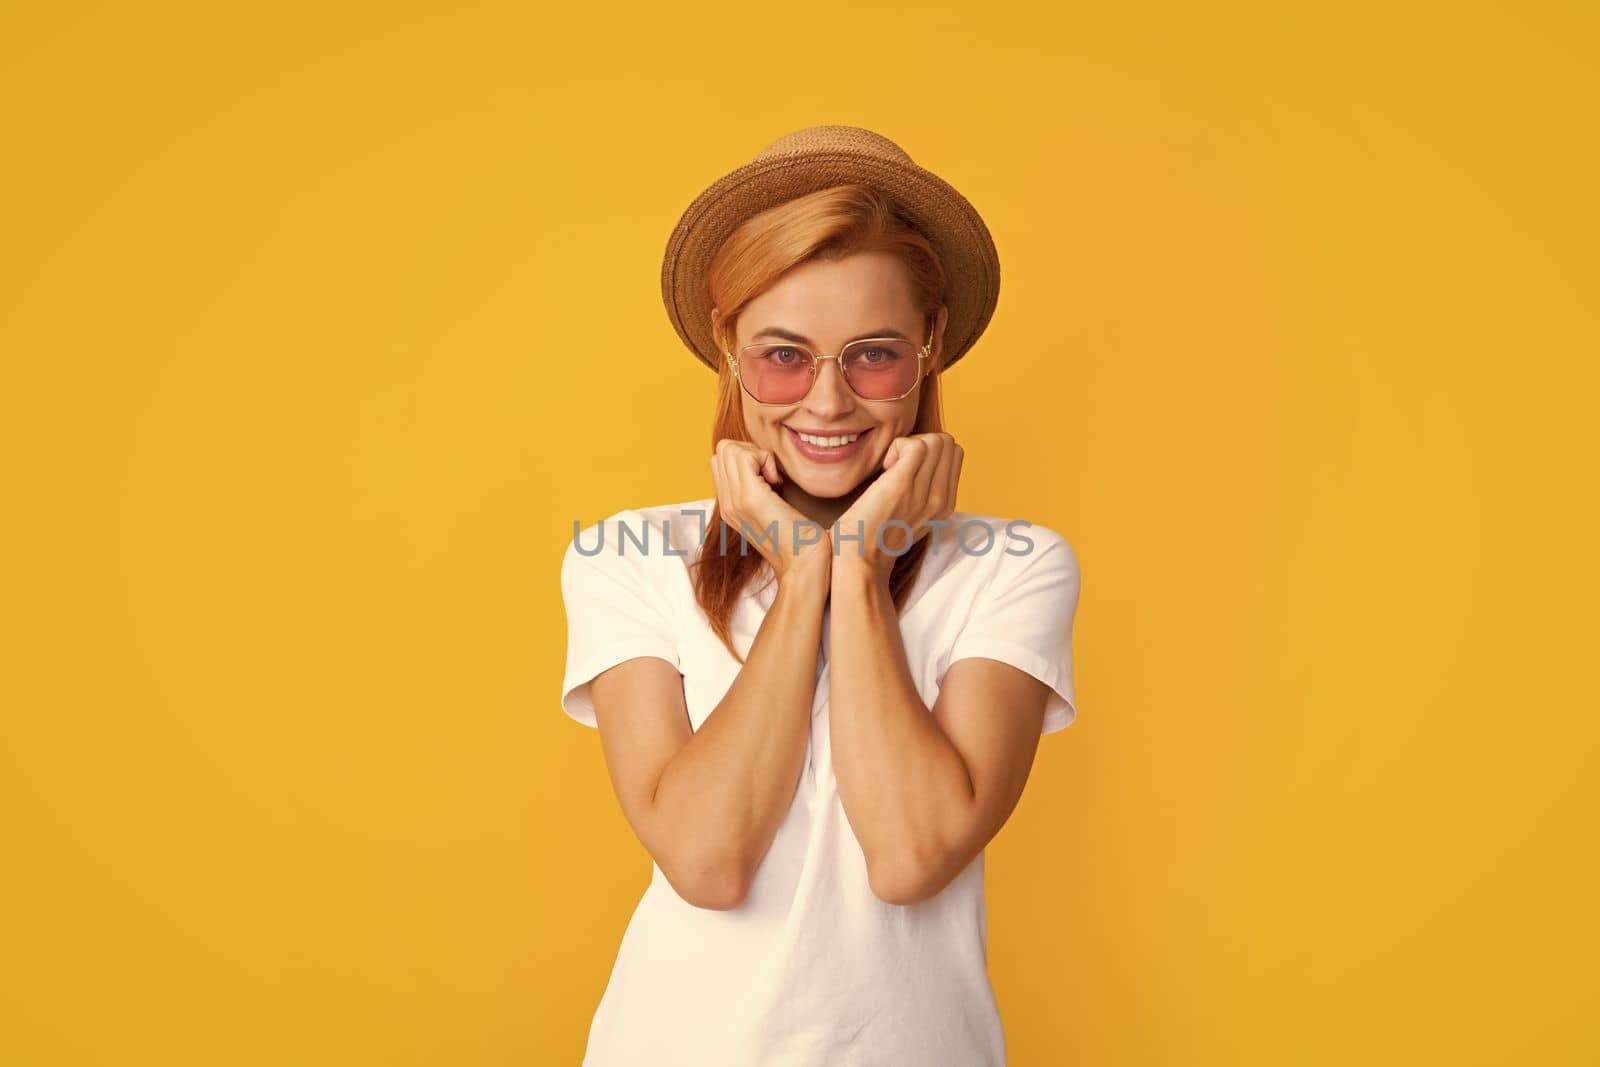 Smiling portrait of pretty young woman wearing sunglasses and straw hat over yellow background. Happy girl enjoying summer